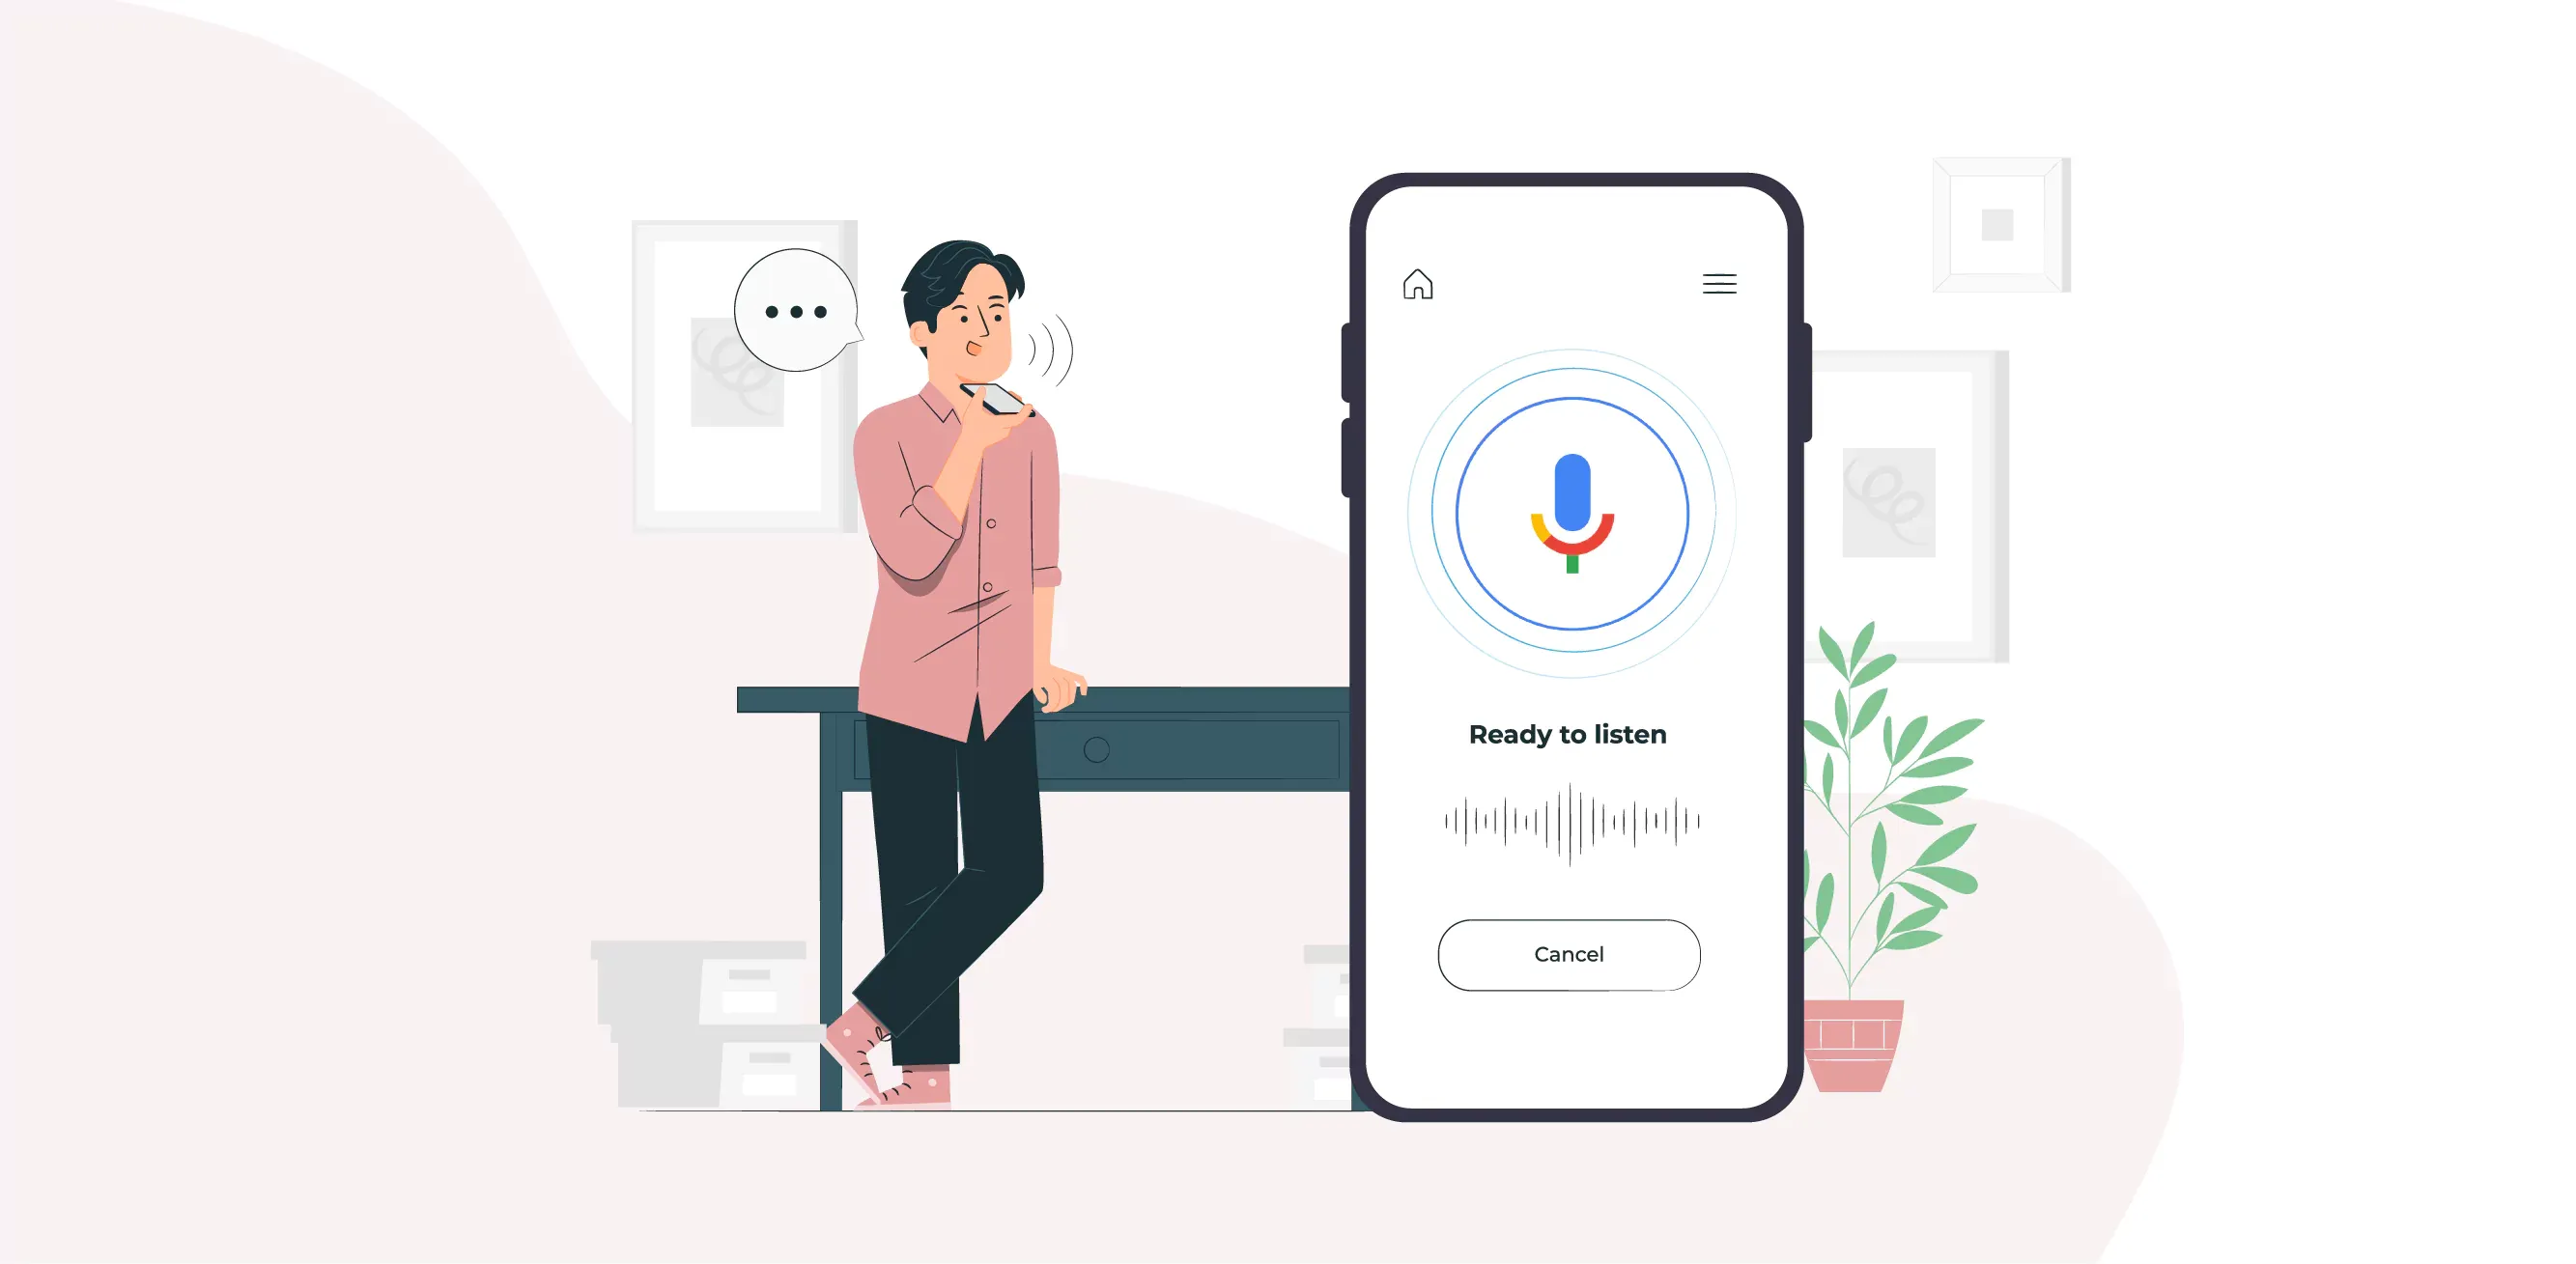 What exactly is Google Assistant?